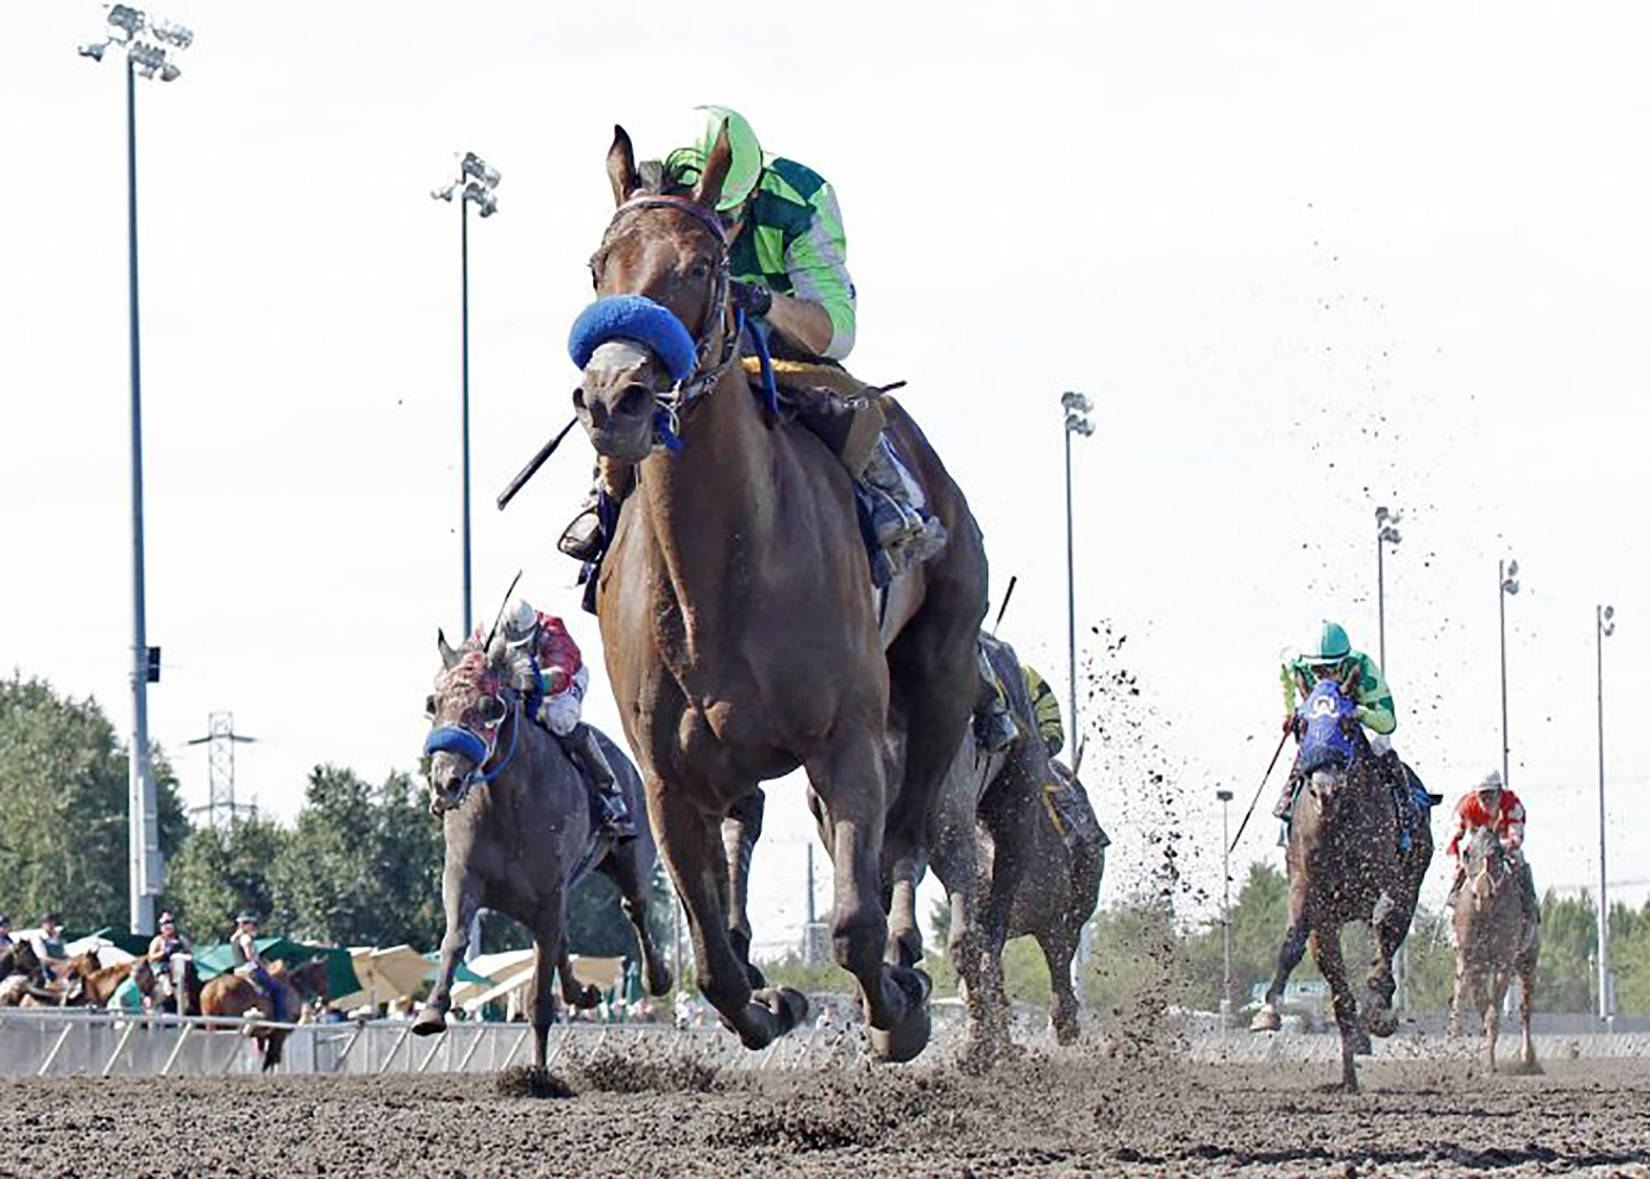 Juan Gutierrez drives Top Quality to victory in the $50,000 Irish Day Stakes for 3-year-old fillies Sunday at Emerald Downs. COURTESY PHOTO